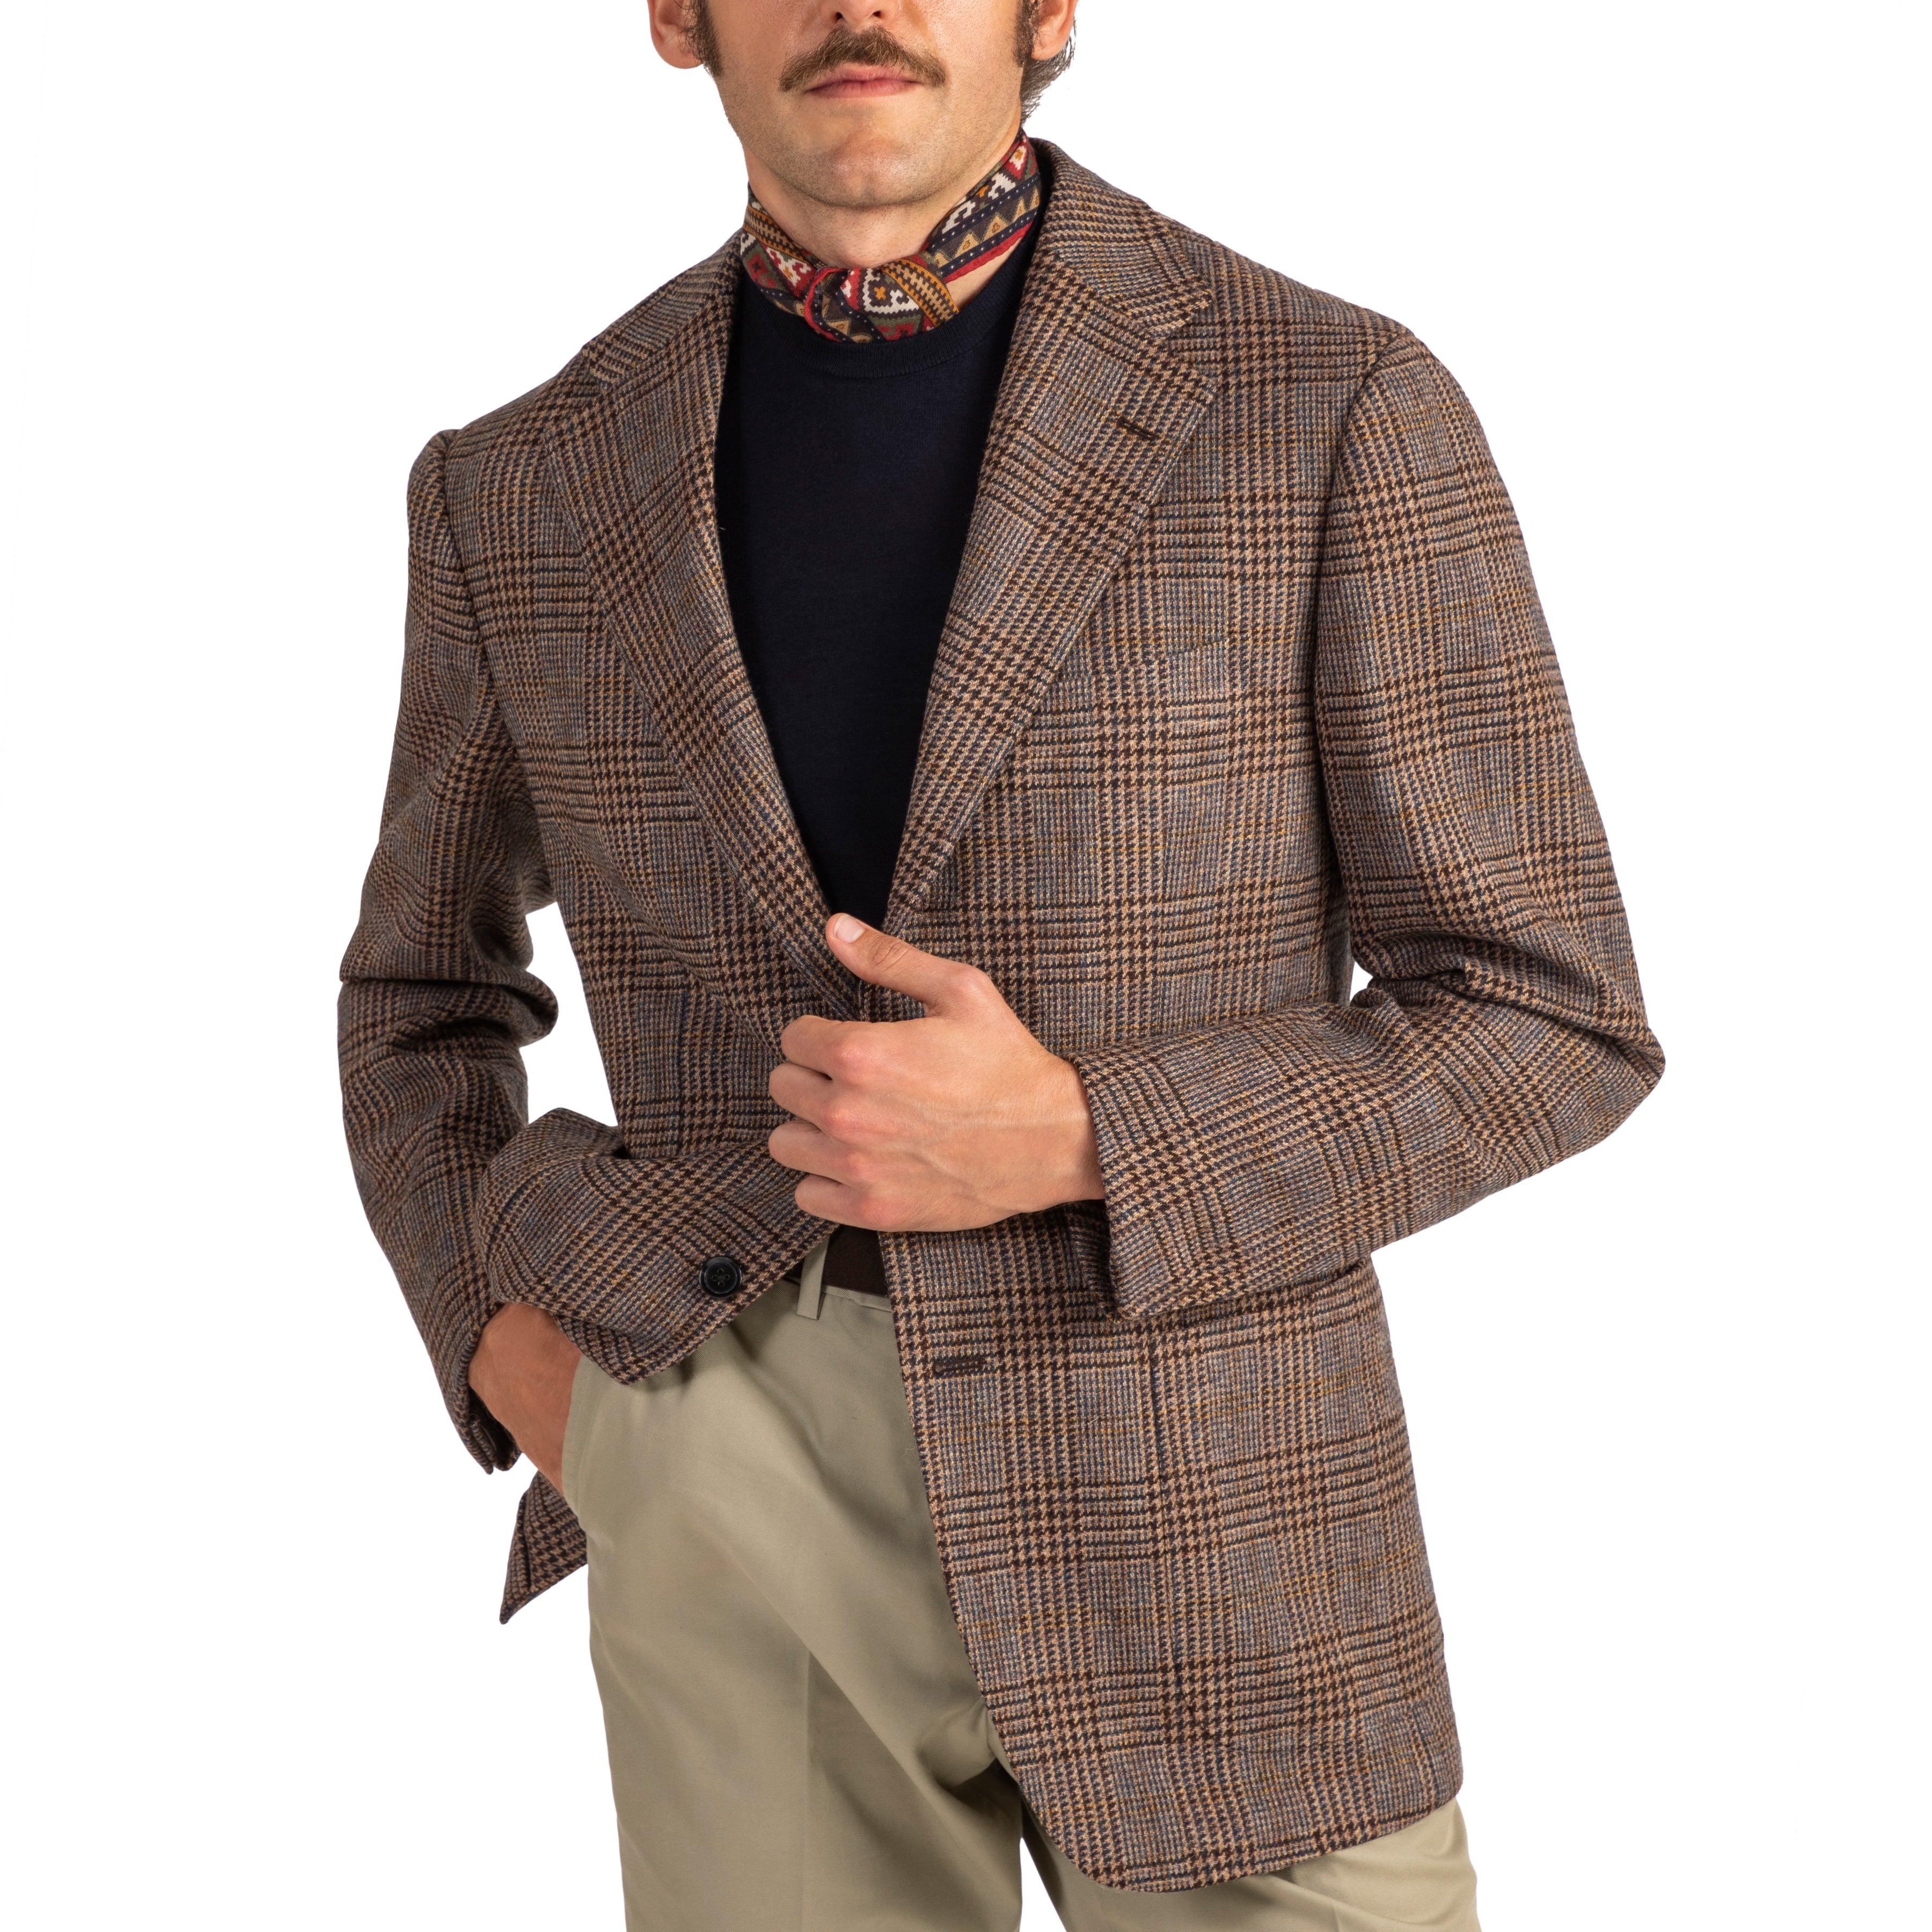 Wool Glencheck Model 3 Sport Coat - The Armoury